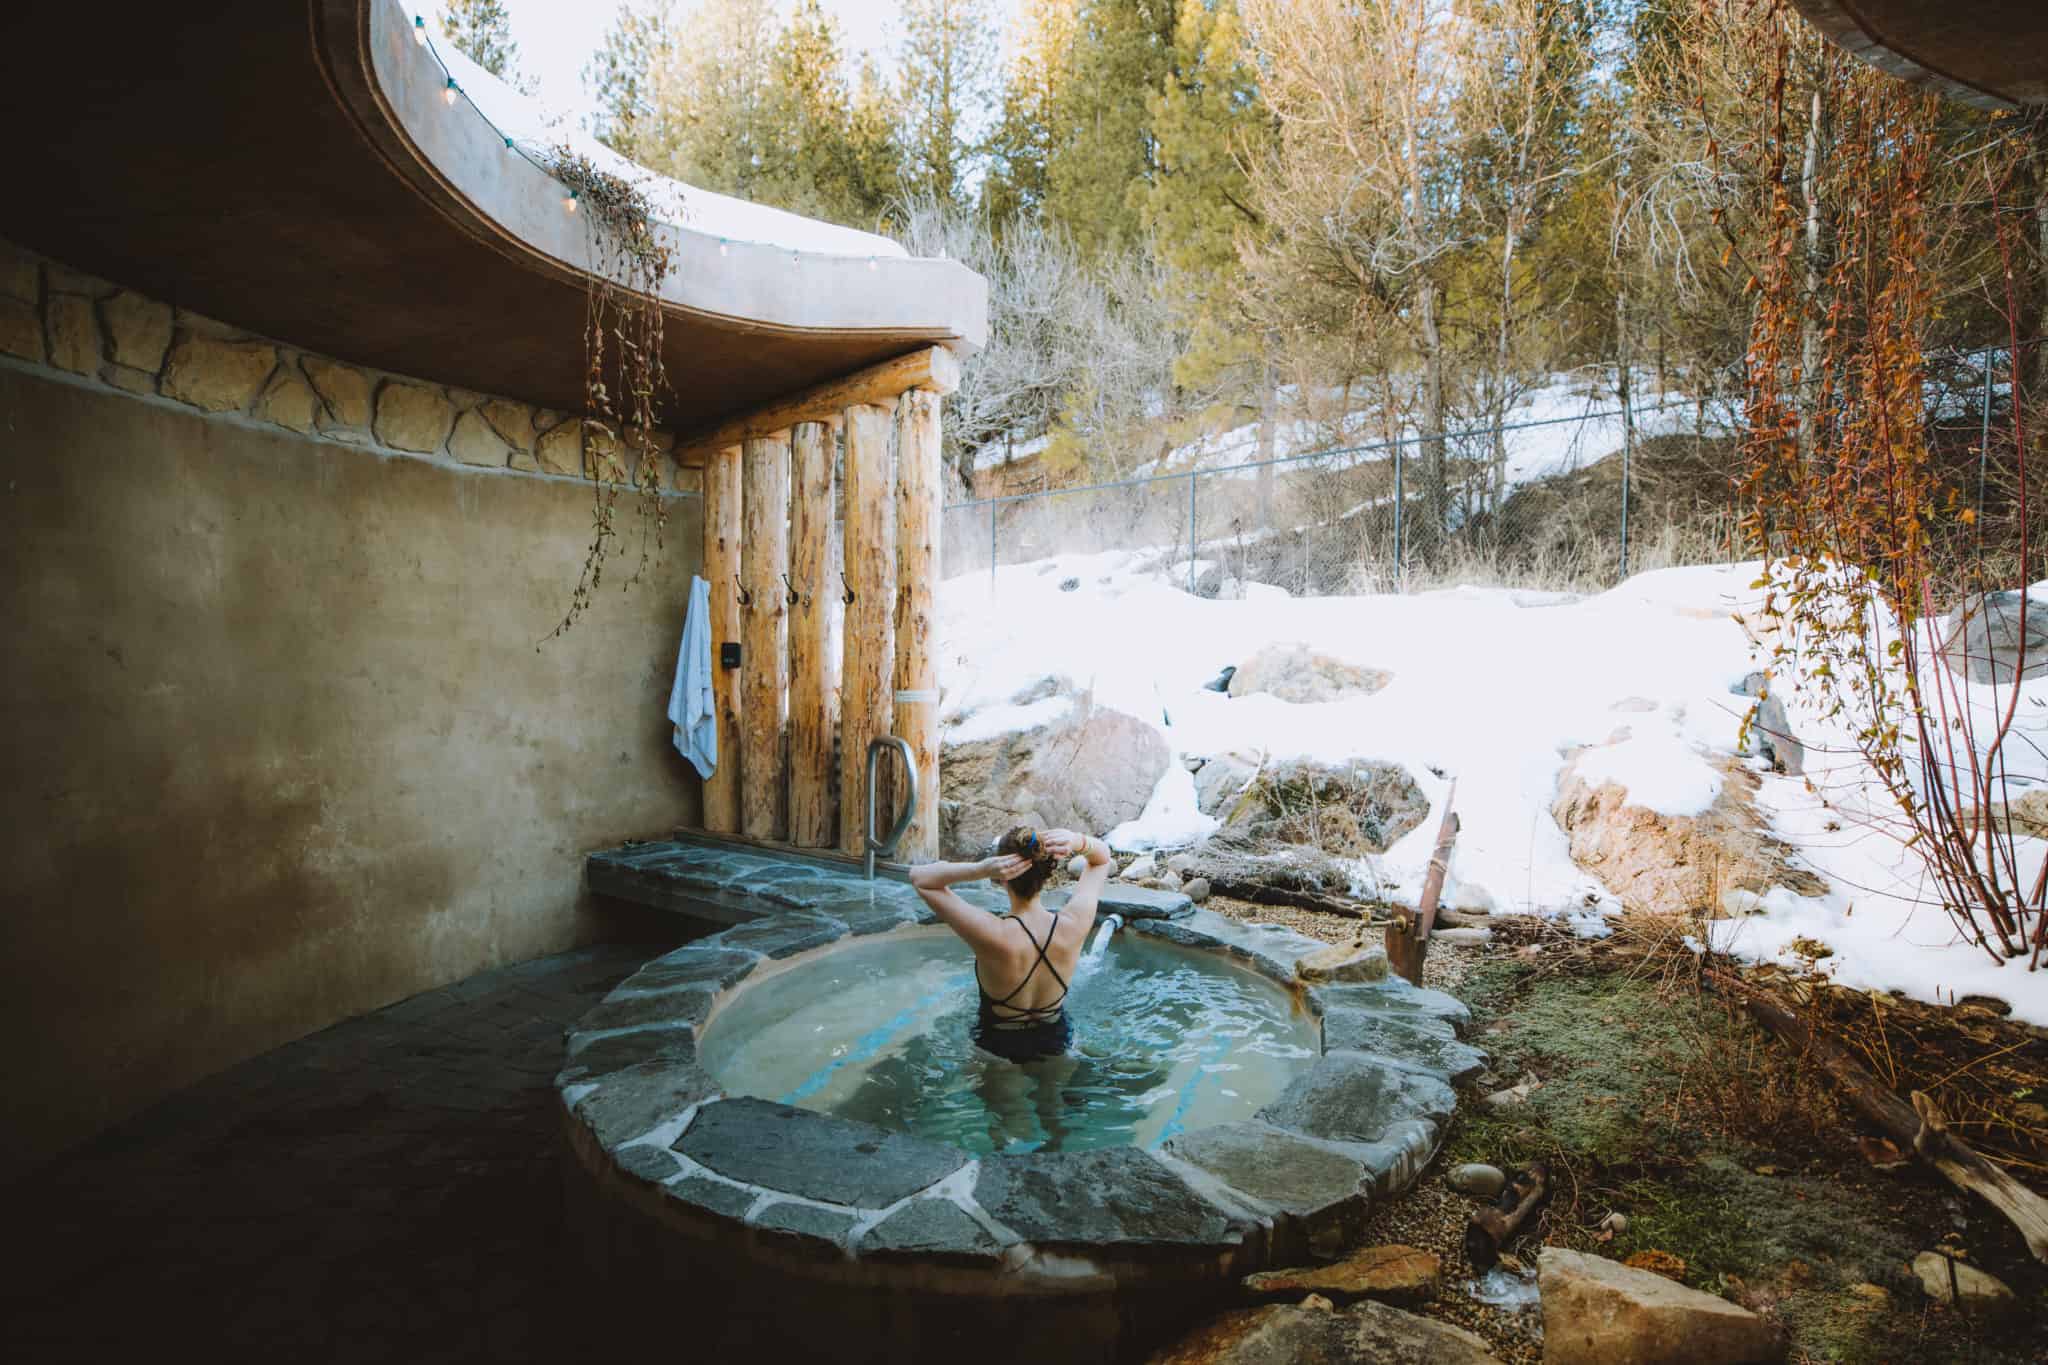 A Magical Escape To The Springs In Idaho City (Dreamy Hot Springs Alert!)